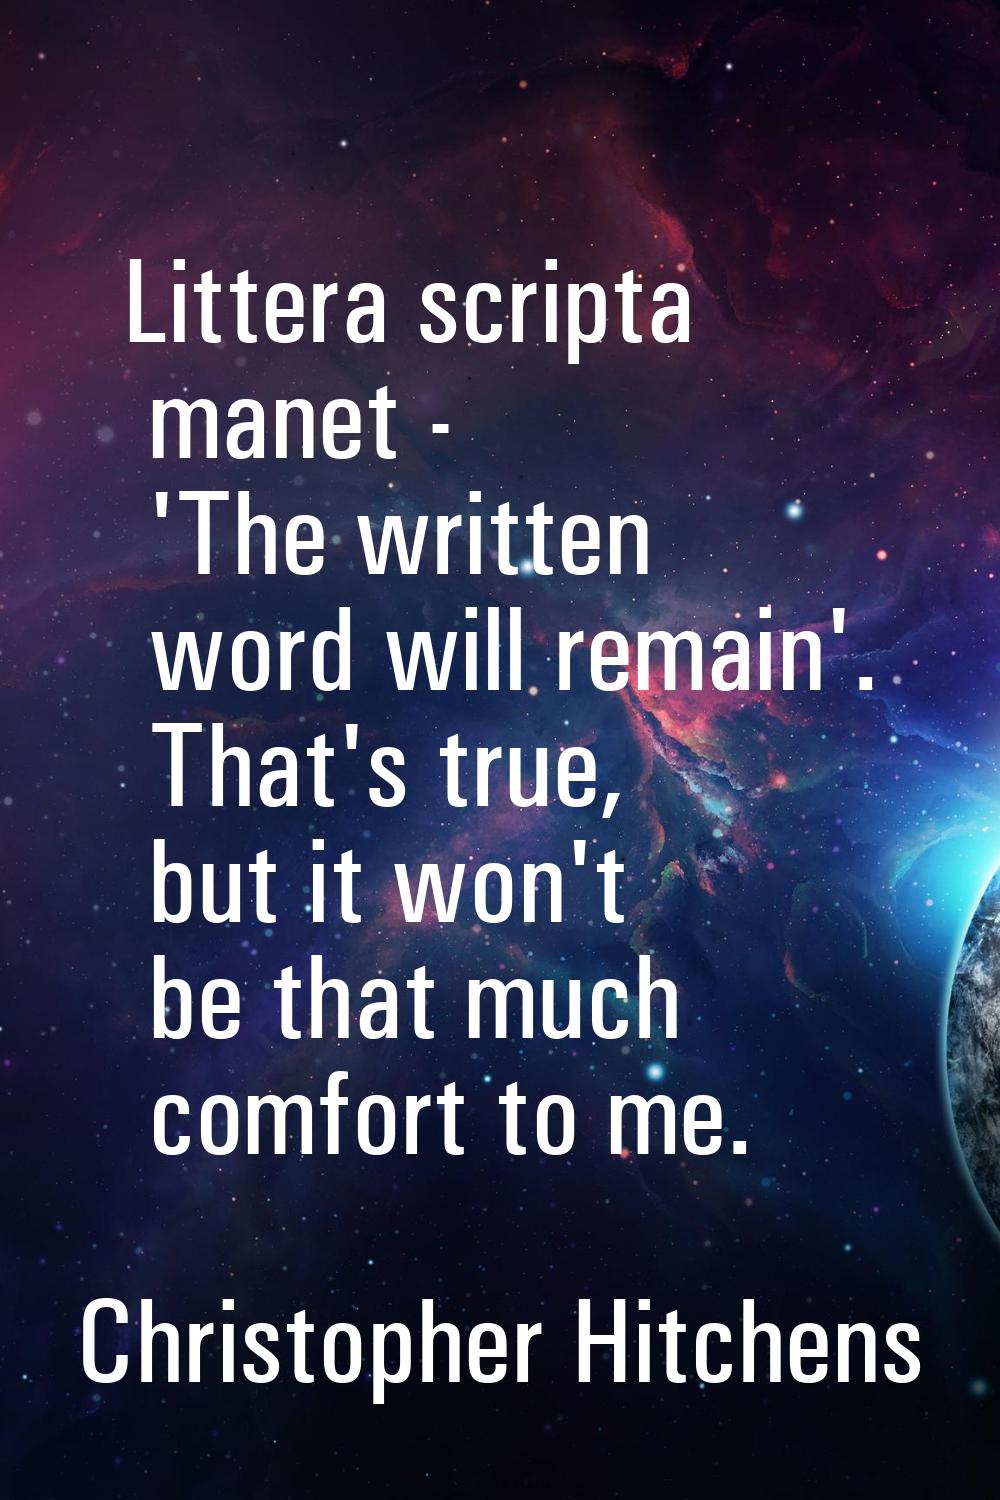 Littera scripta manet - 'The written word will remain'. That's true, but it won't be that much comf